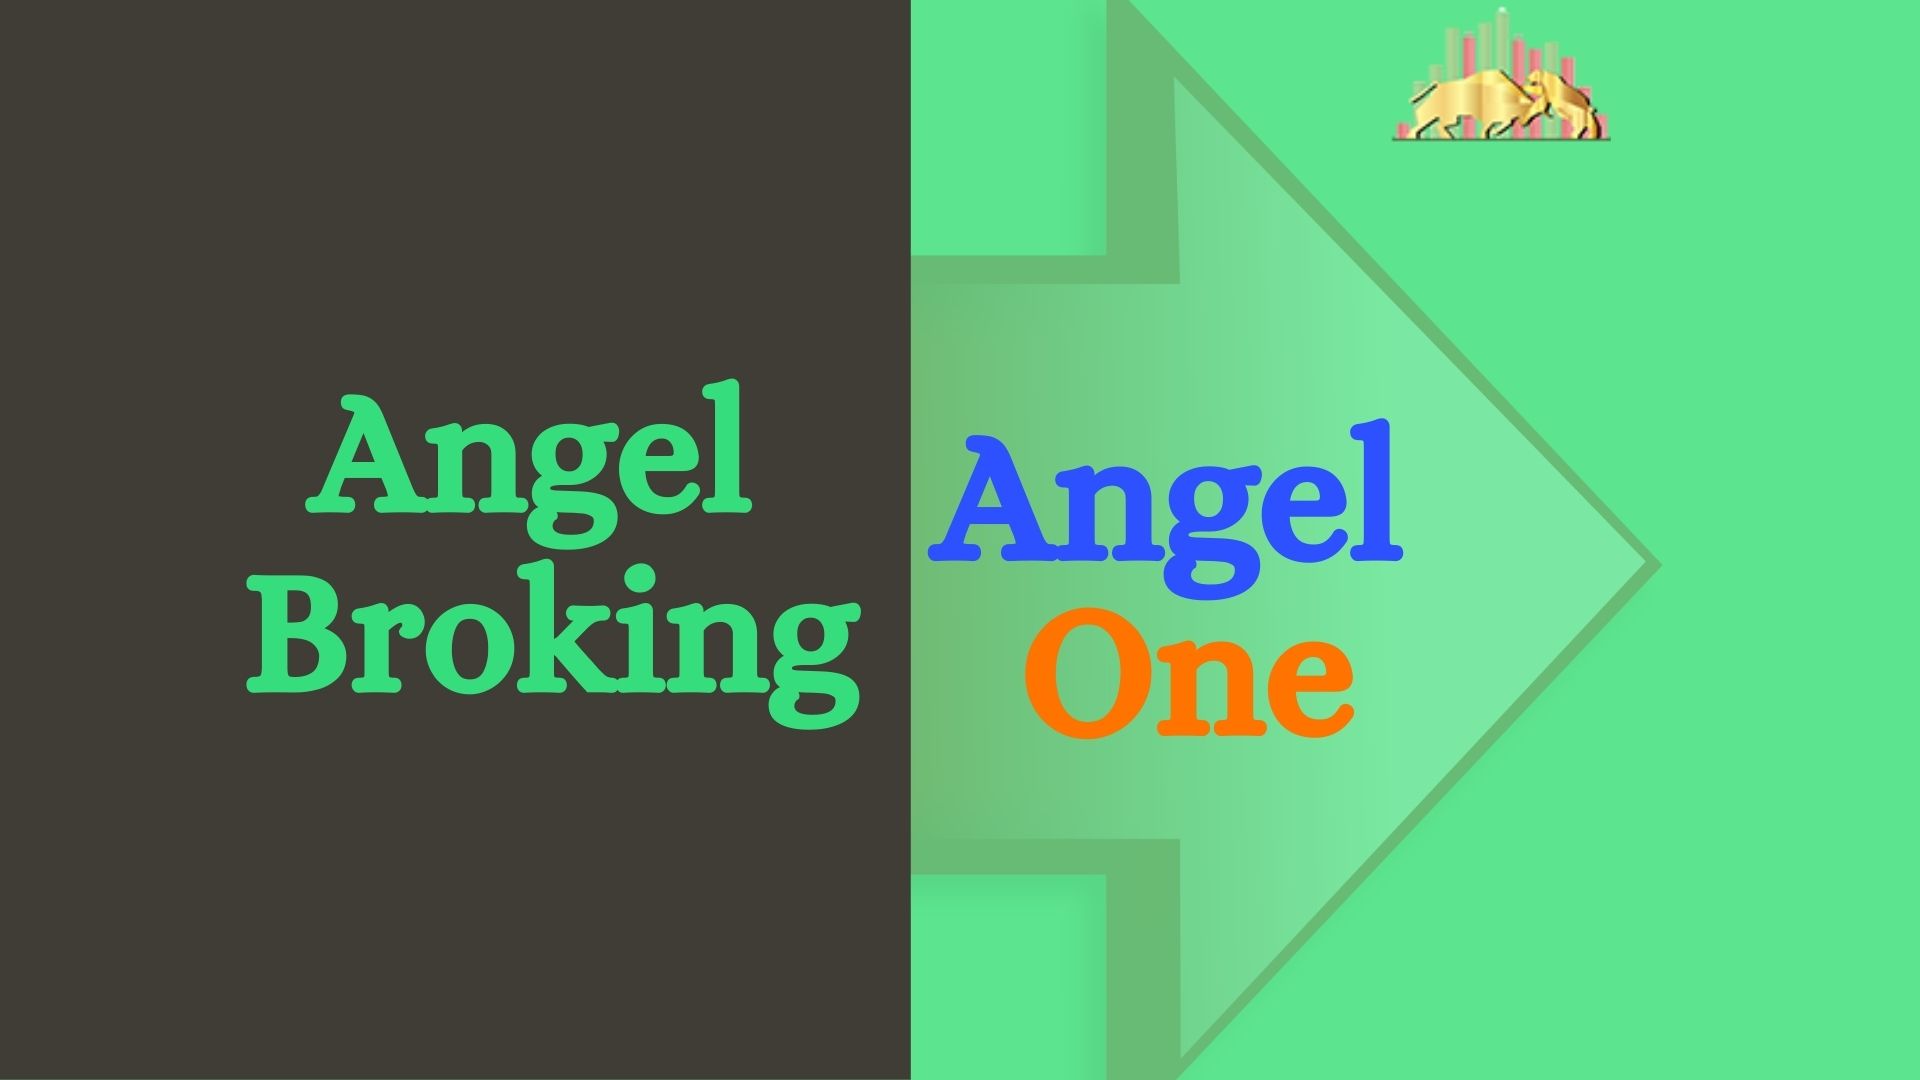 Angel Broking To Become Angel One